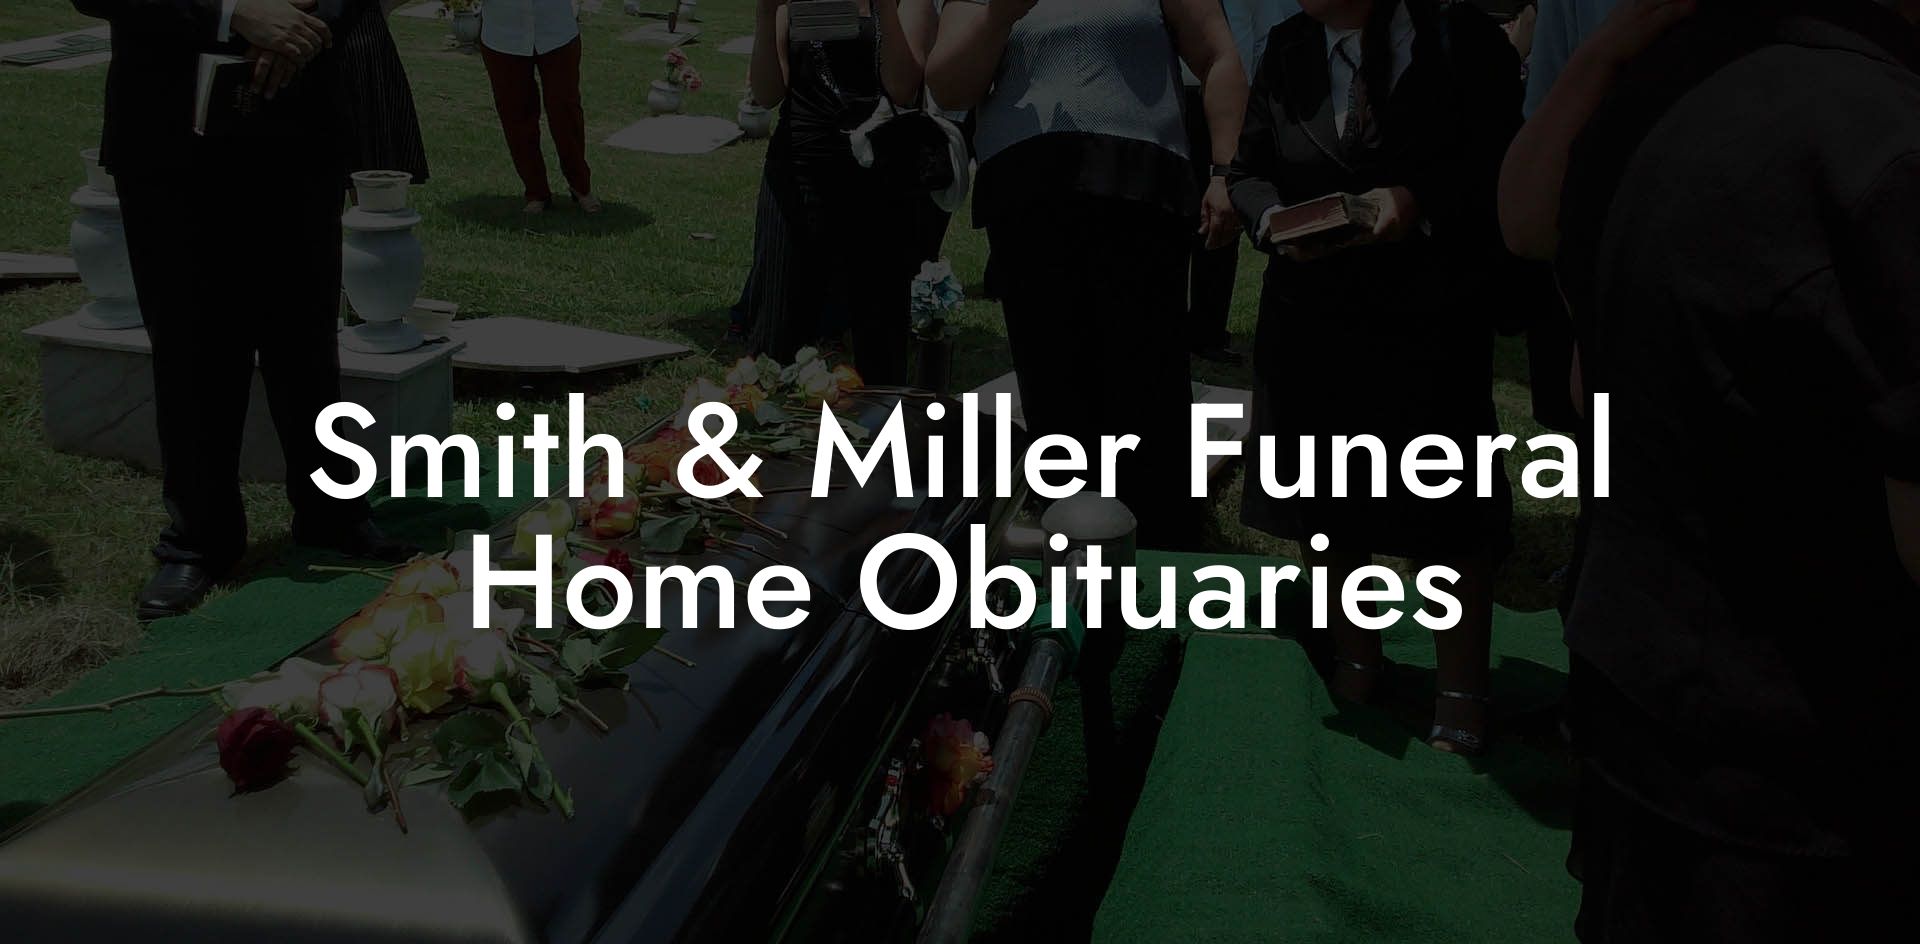 Smith & Miller Funeral Home Obituaries